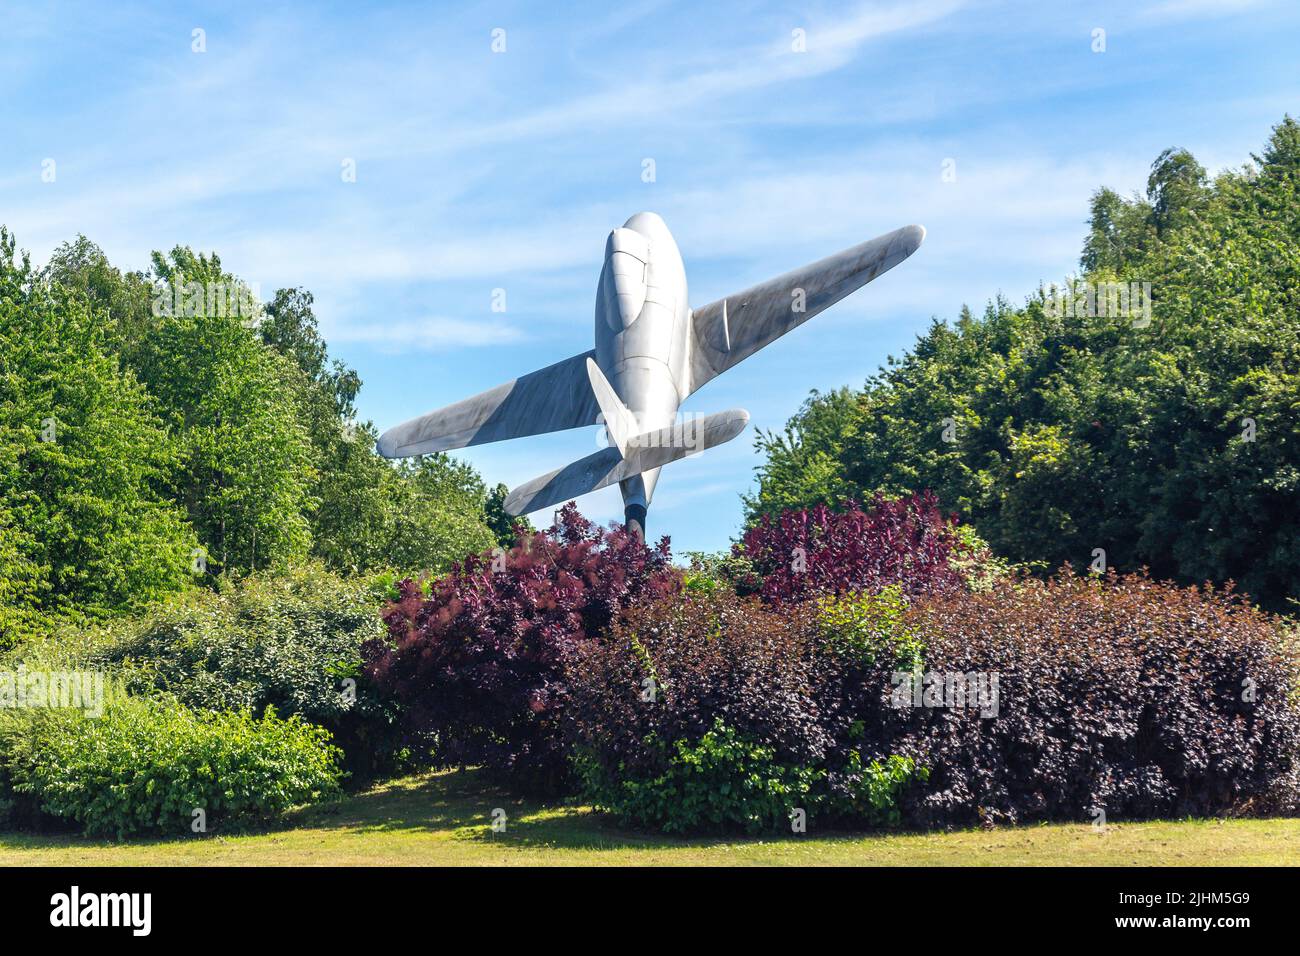 Gloster Aircraft sur le rond-point de Whittle, Lutterworth, Leicestershire, Angleterre, Royaume-Uni Banque D'Images